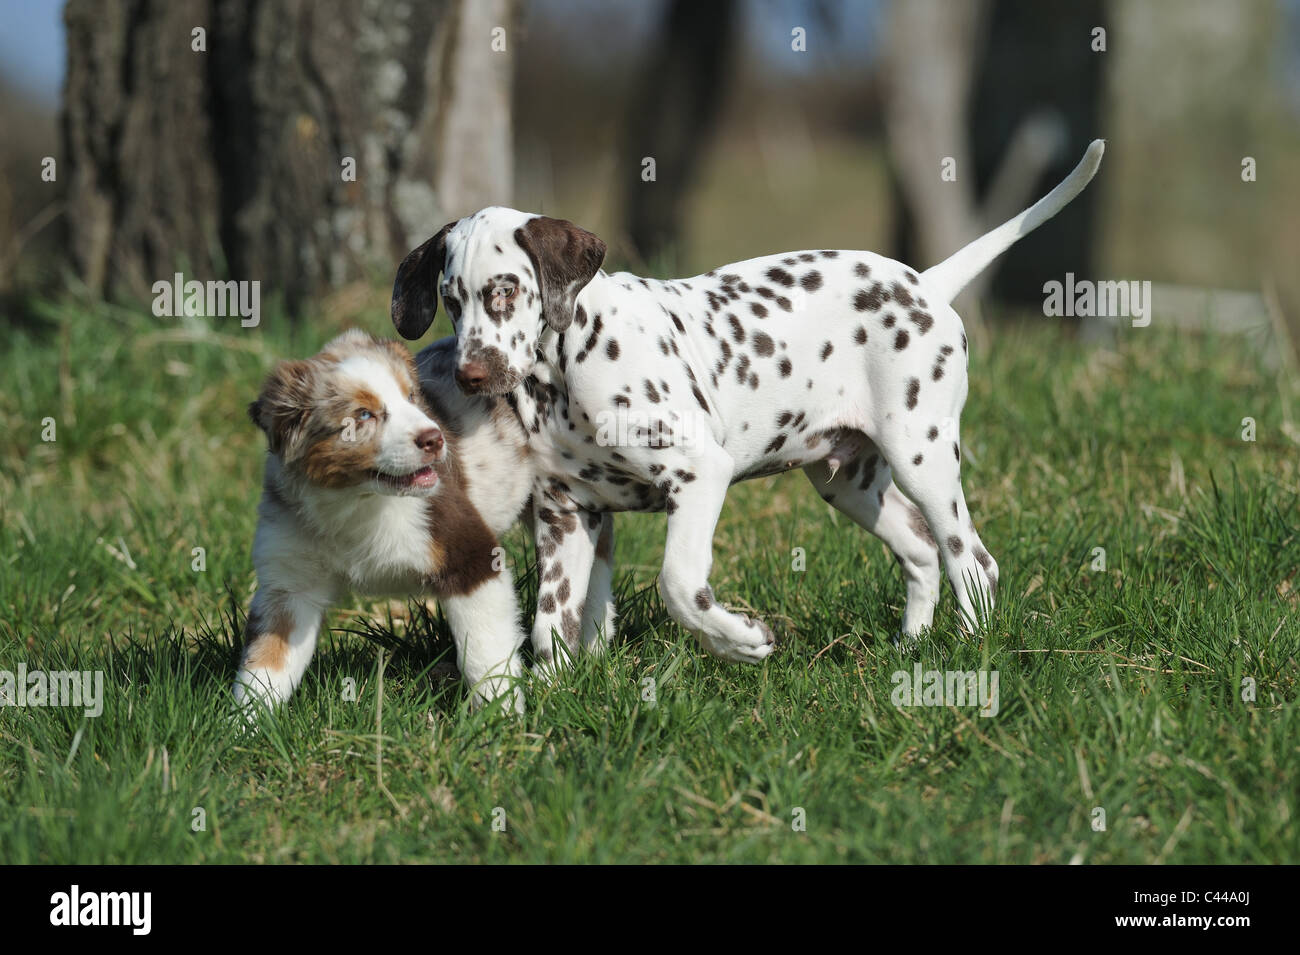 Dalmatian and Australian Shepherd (Canis lupus familiaris). Two puppies playing on a meadow. Stock Photo